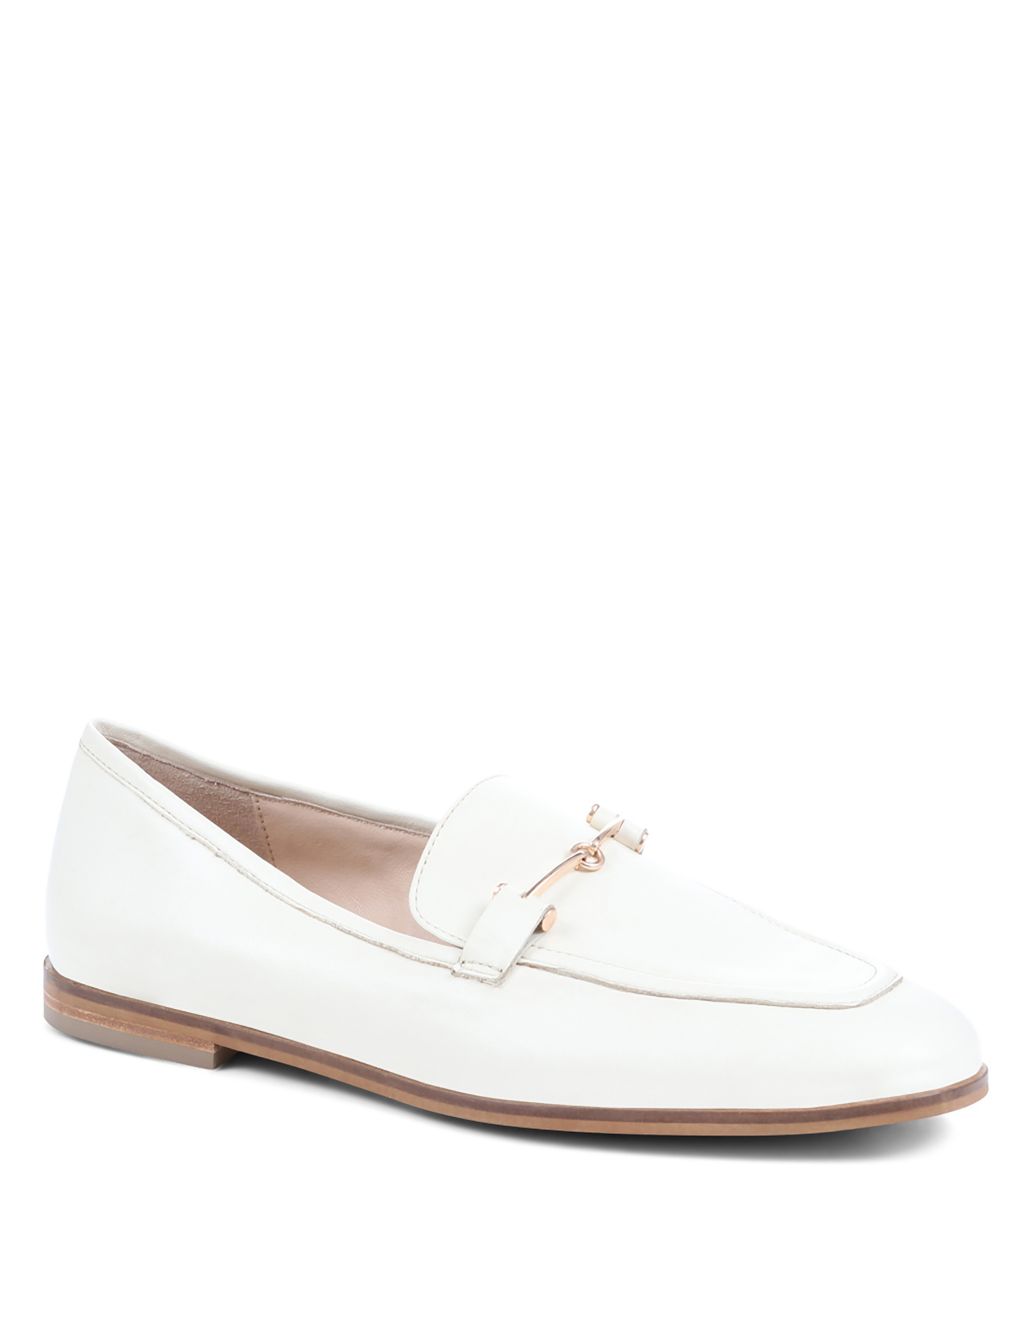 Leather Slip On Bar Flat Loafers image 3